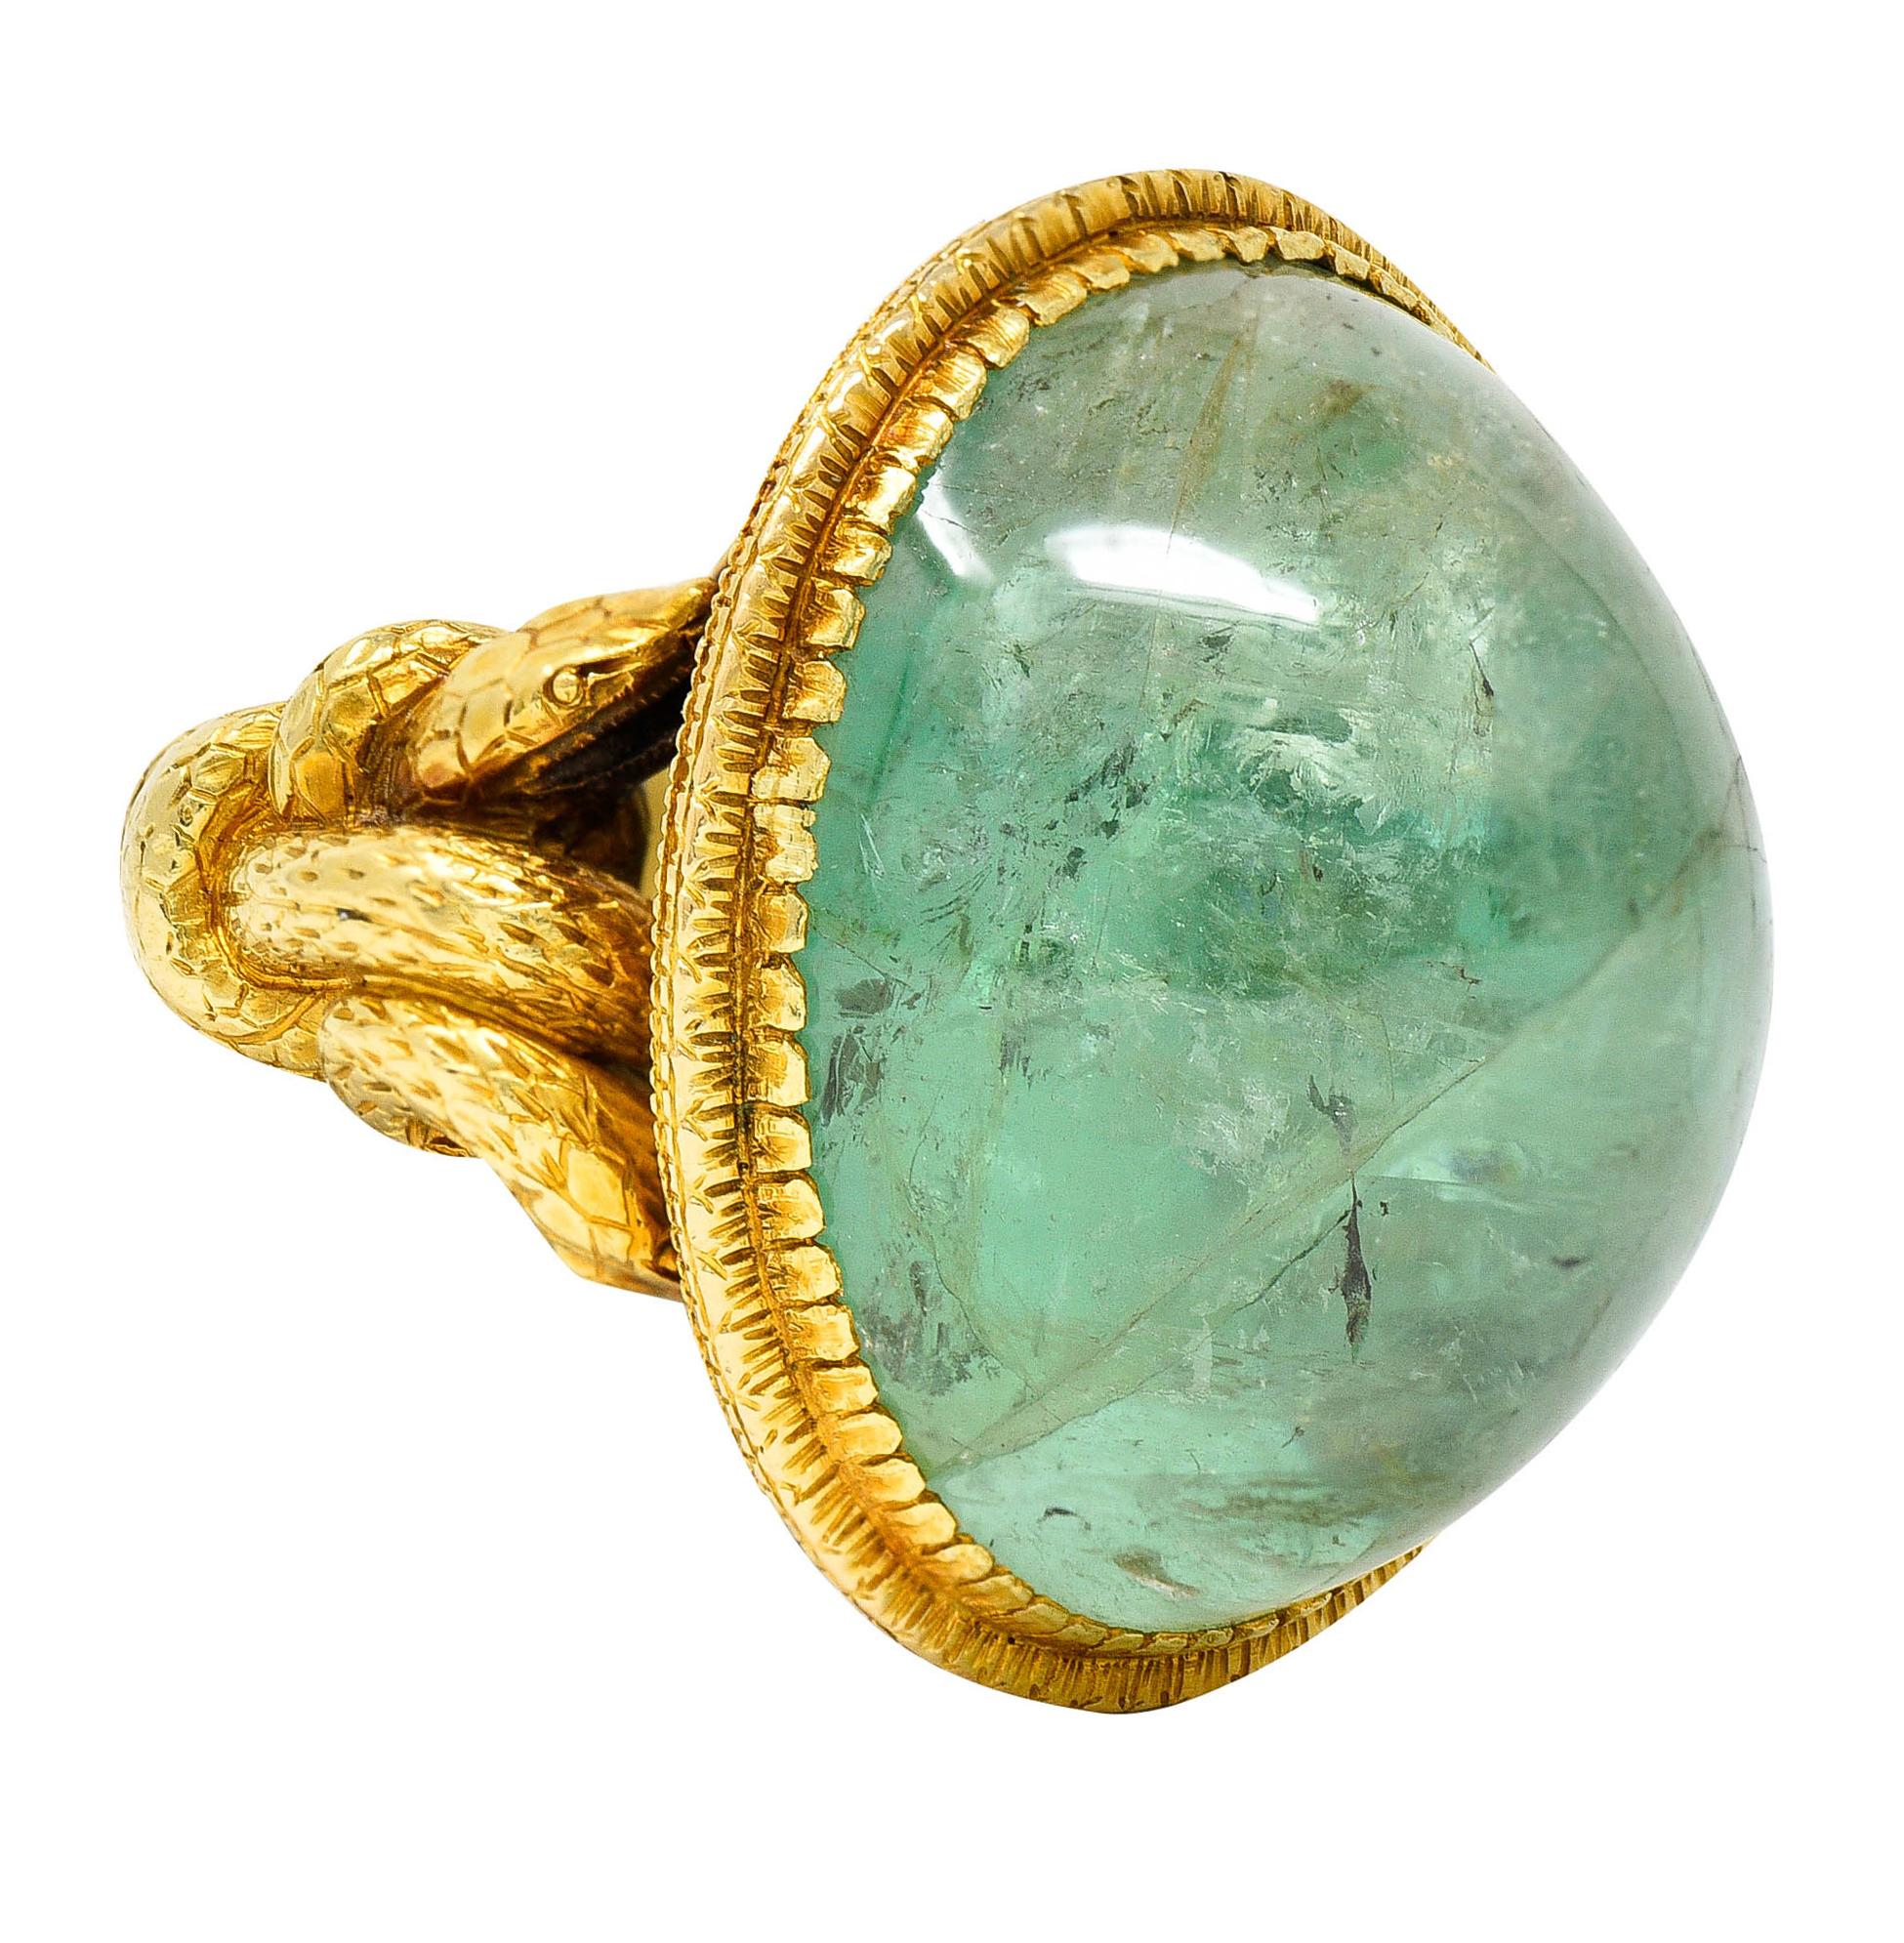 Centering a highly domed oval emerald cabochon weighing approximately 16.00 carats

Medium light green with bluish undertones and translucent with natural inclusions

Set in a textured gold surround with a fanciful scalloped edge

Shank and